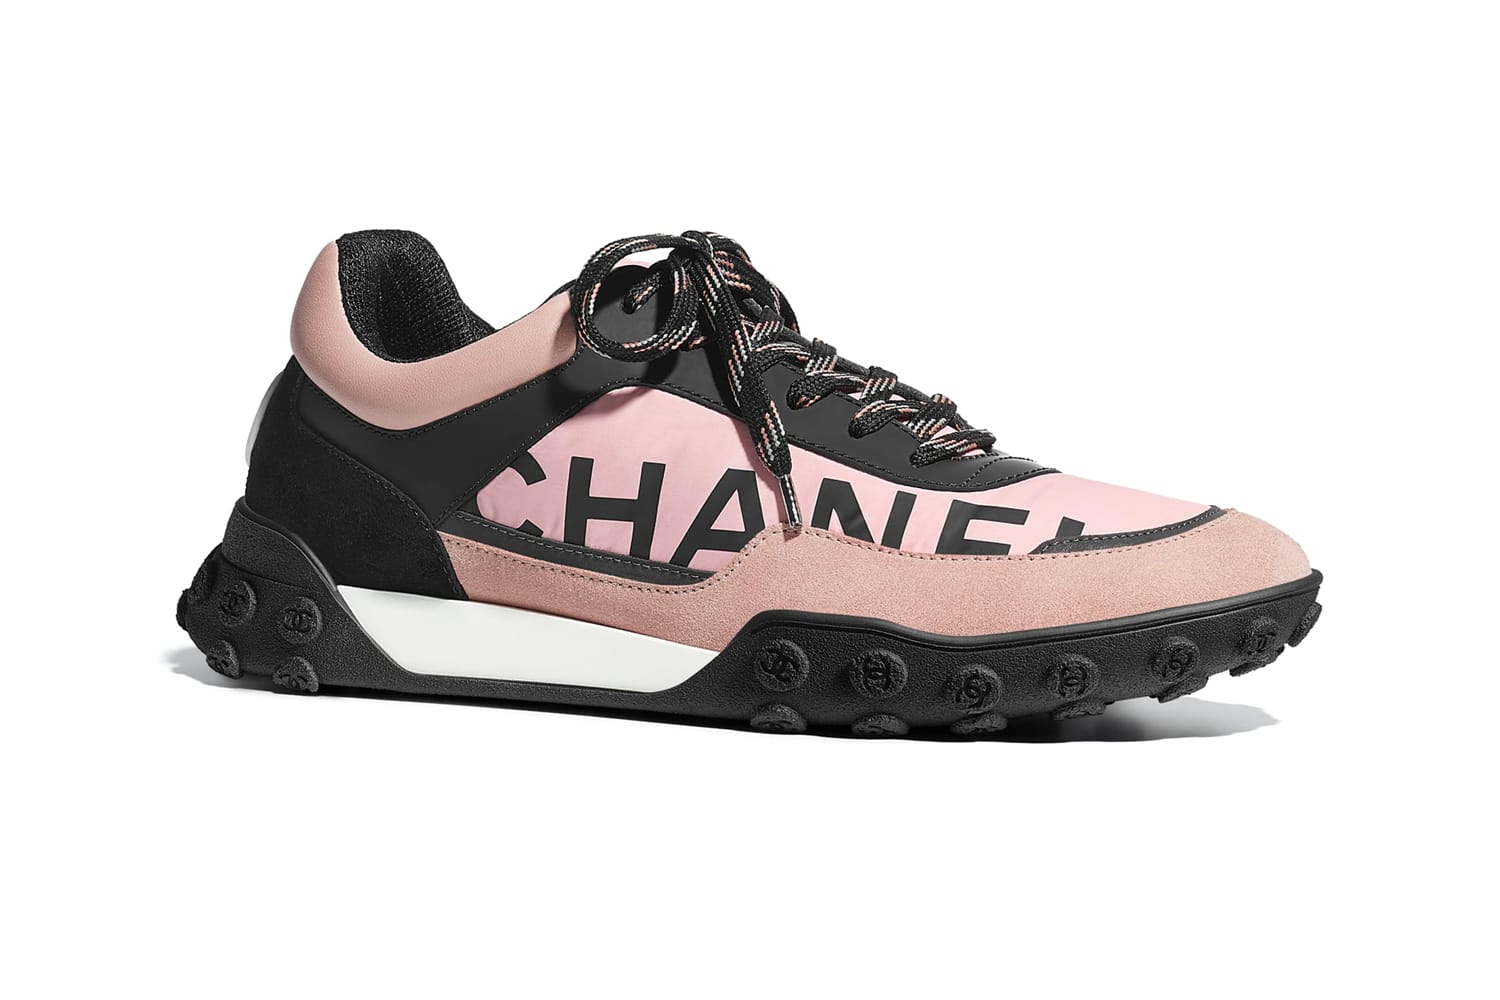 chanel tennis shoes pink